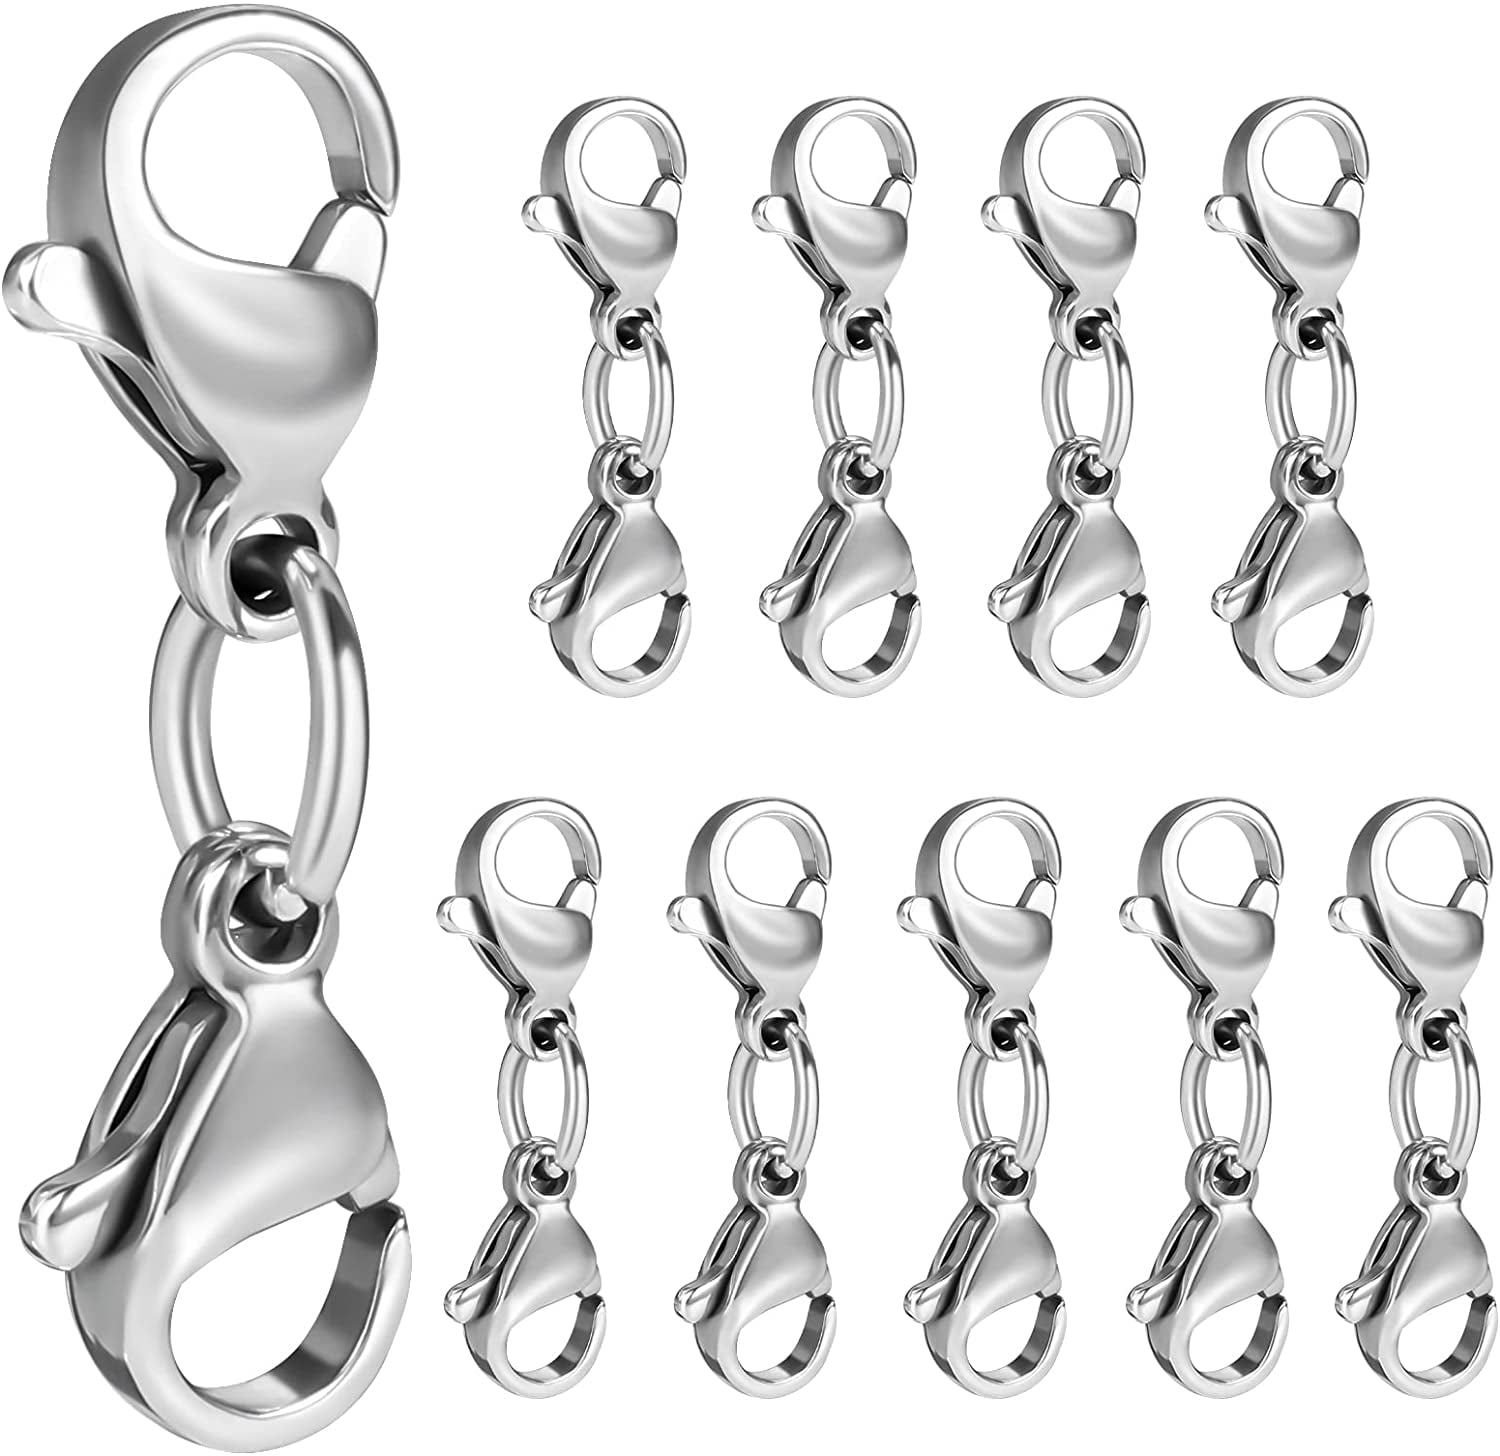  Qulltk 10 Pack Double Lobster Clasp Necklace Clasp Classic  Double End Design Necklace Clasps and Closures, Necklace Extender Double  Claw Connector Suitable for Jewelry Chain